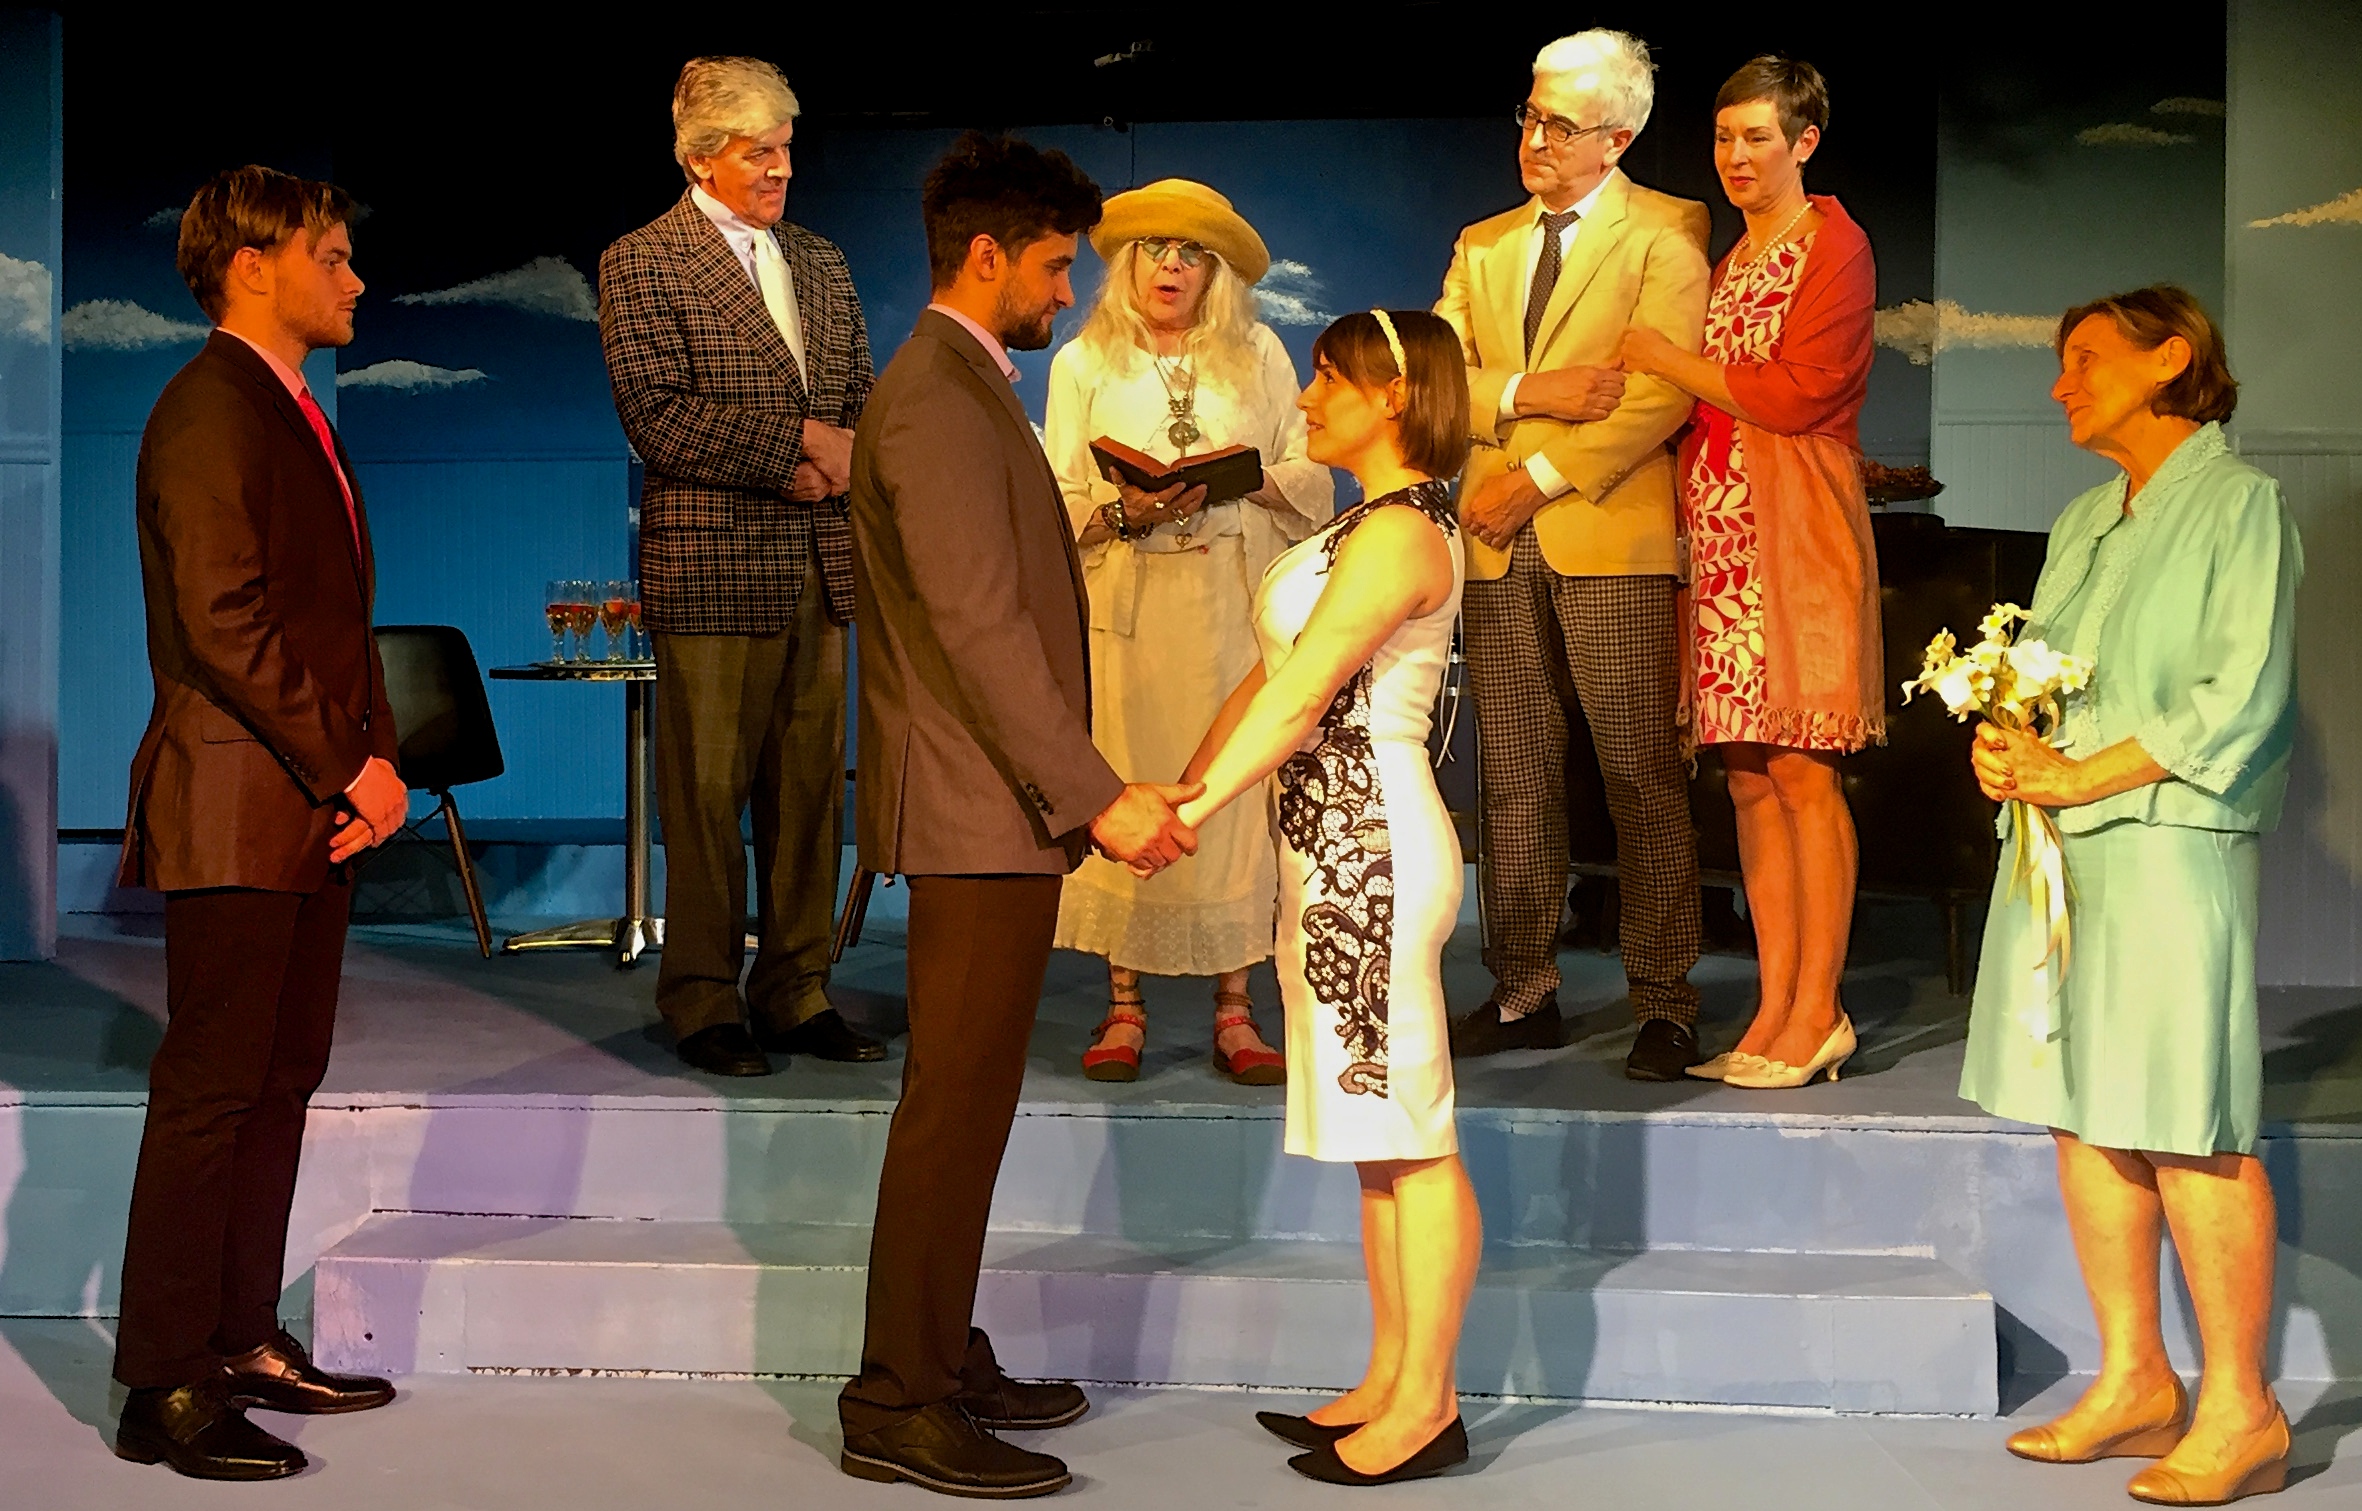 STS Playhouse presents "Prelude to a Kiss" by Craig Lucas